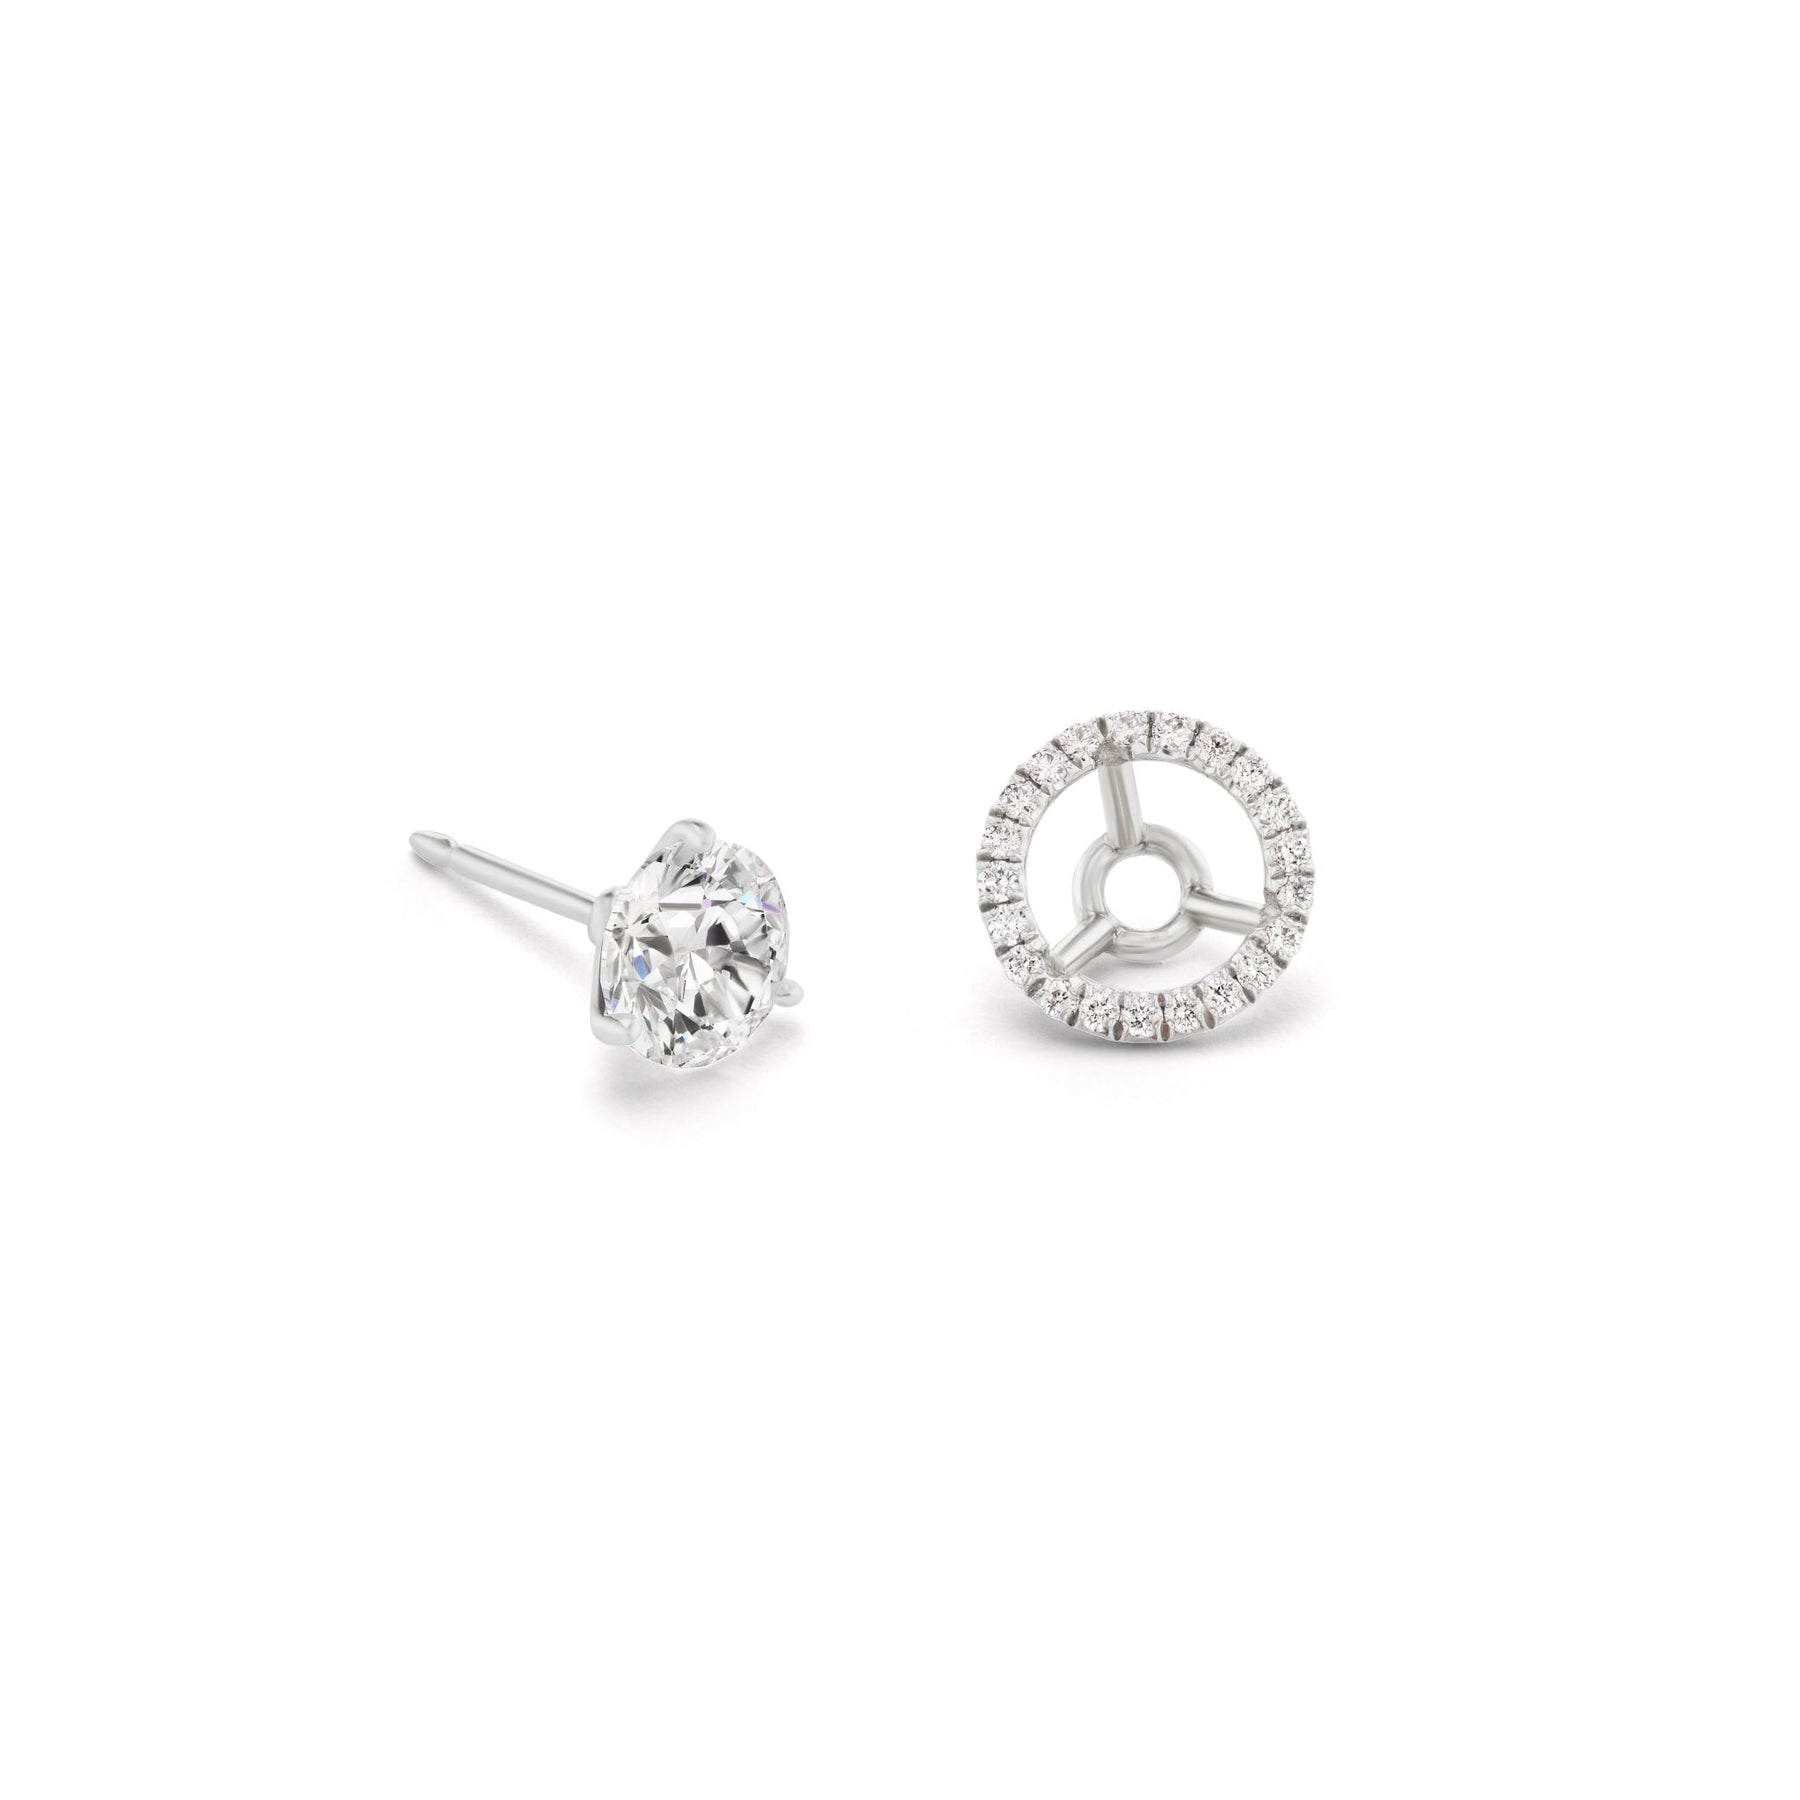 Pavé Halo Ear Jackets in Platinum with Round Brilliant Diamonds